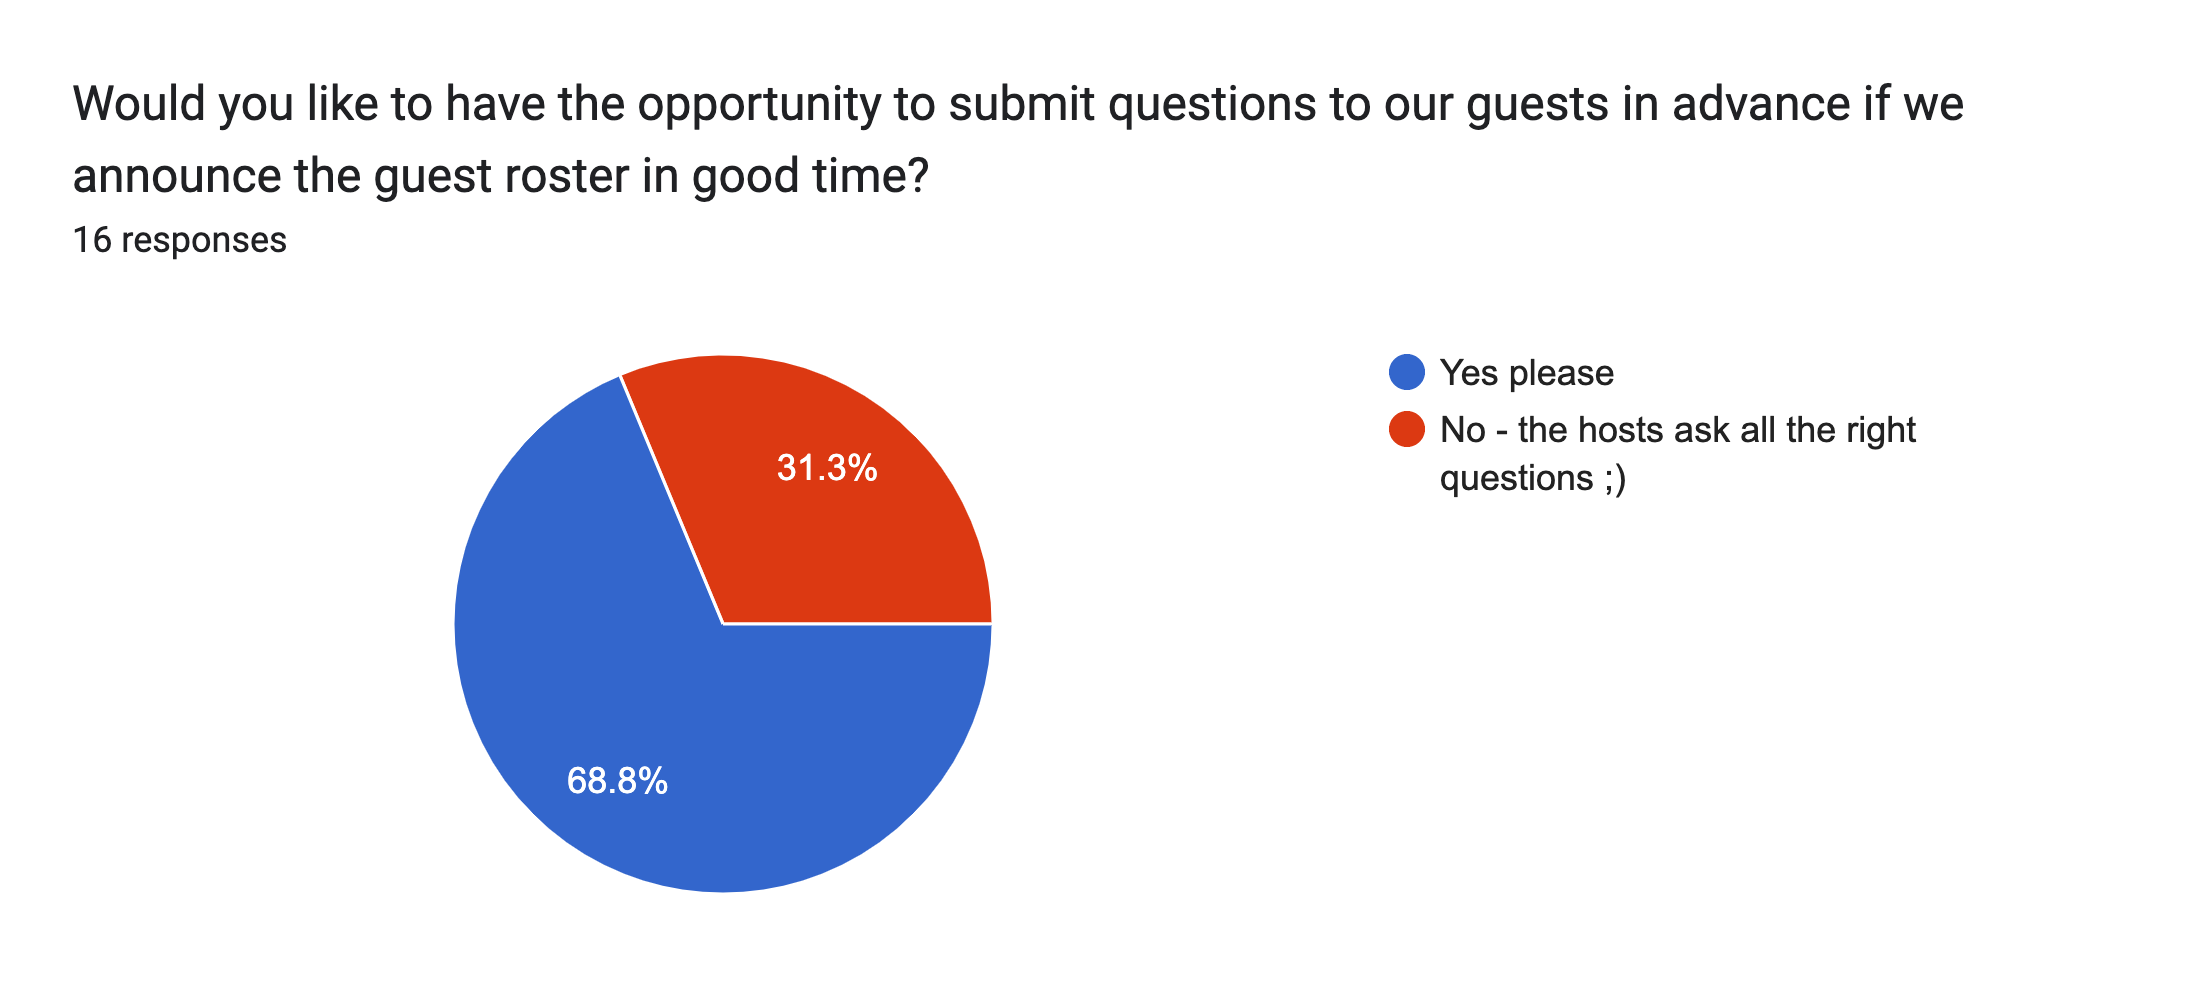 Forms response chart. Question title: Would you like to have the opportunity to submit questions to our guests in advance if we announce the guest roster in good time?. Number of responses: 16 responses.